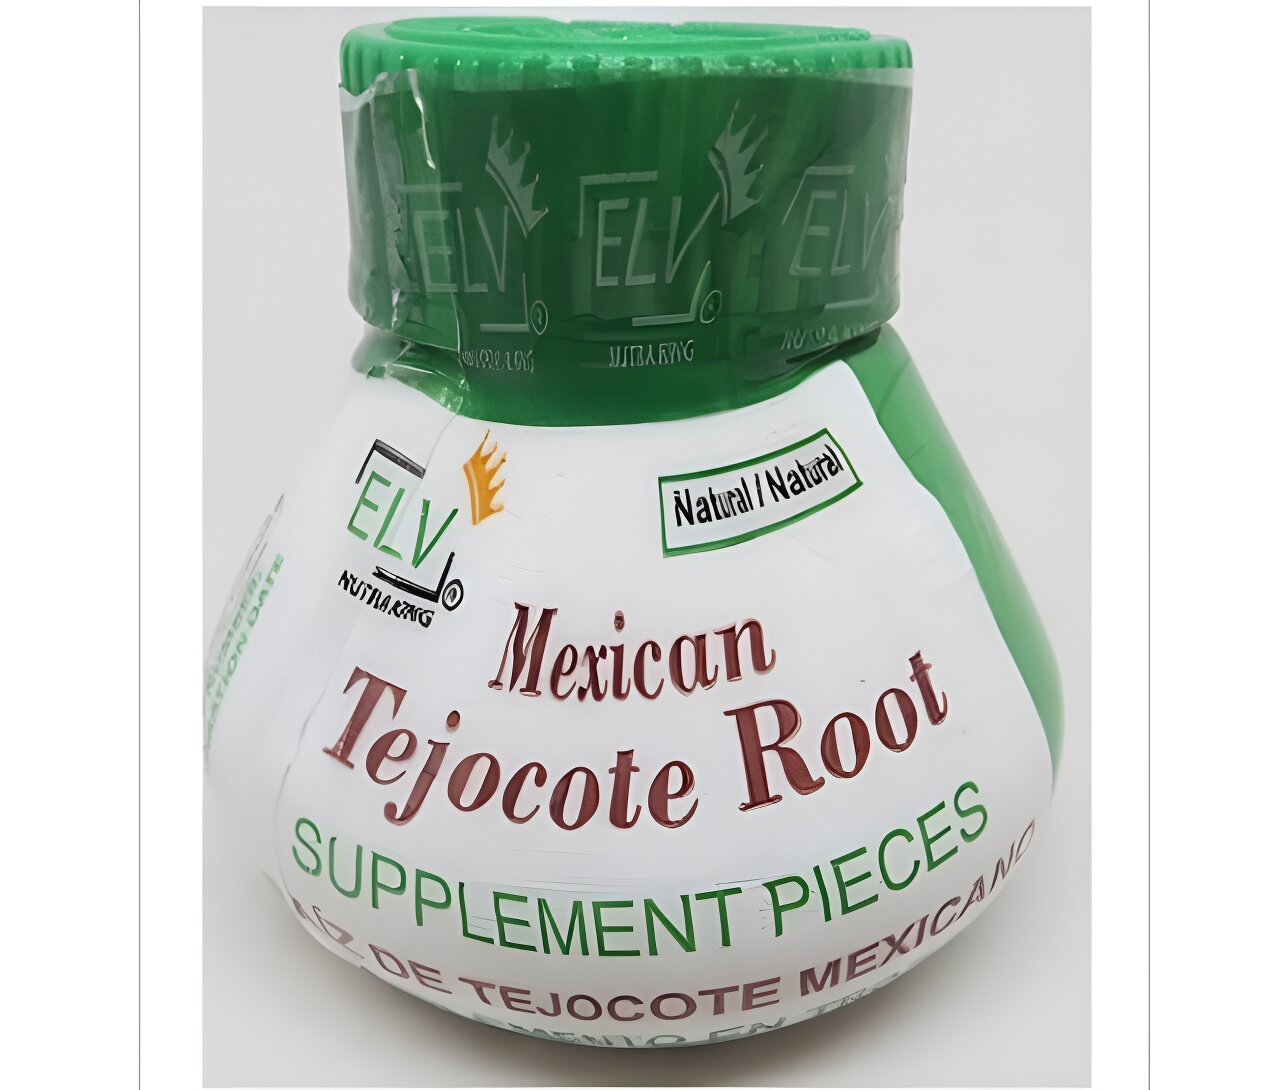 Tejocote supplements sold online at Amazon Etsy may contain fatal poison FDA